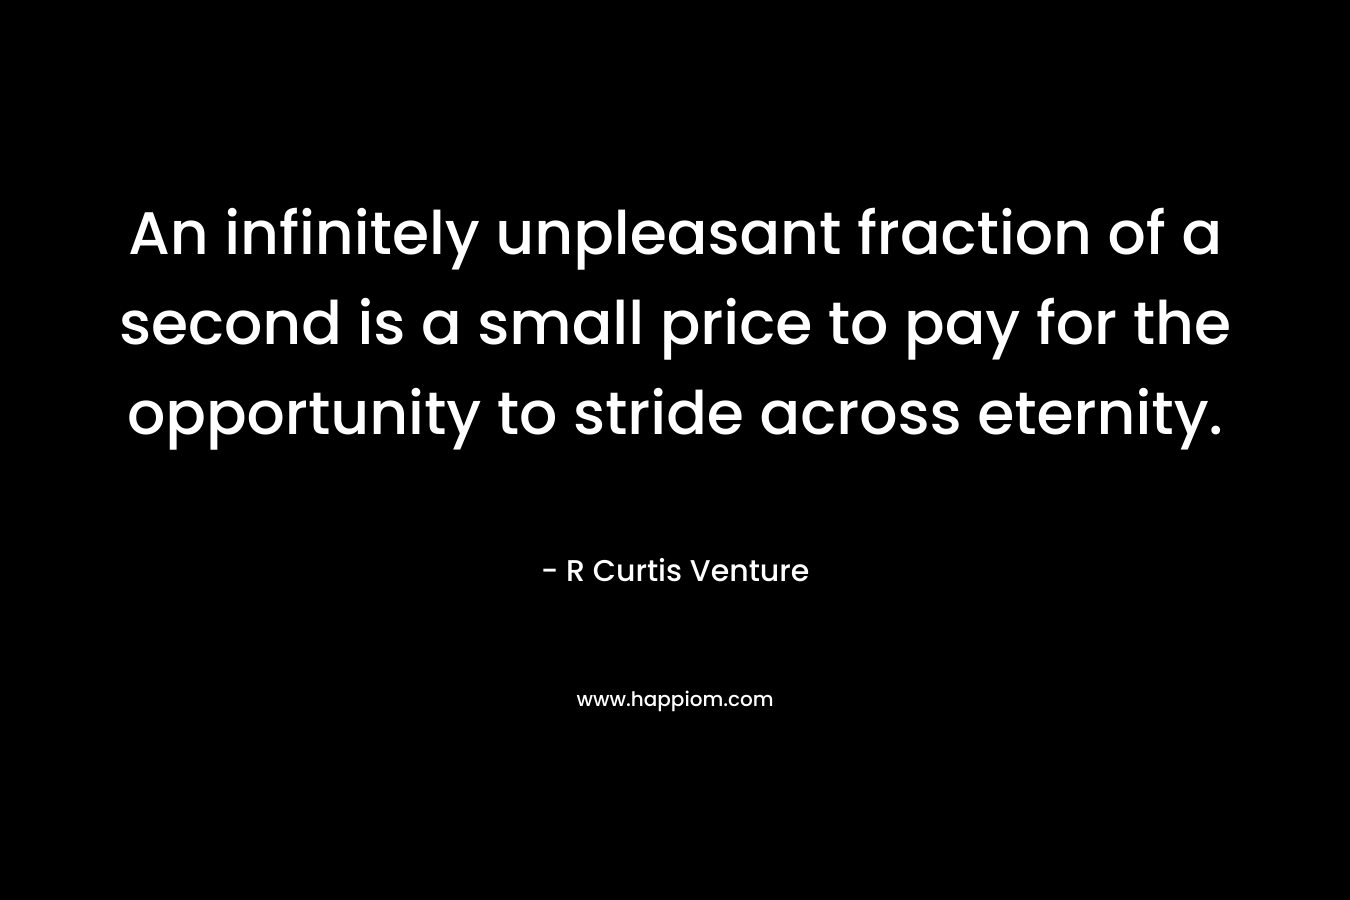 An infinitely unpleasant fraction of a second is a small price to pay for the opportunity to stride across eternity.